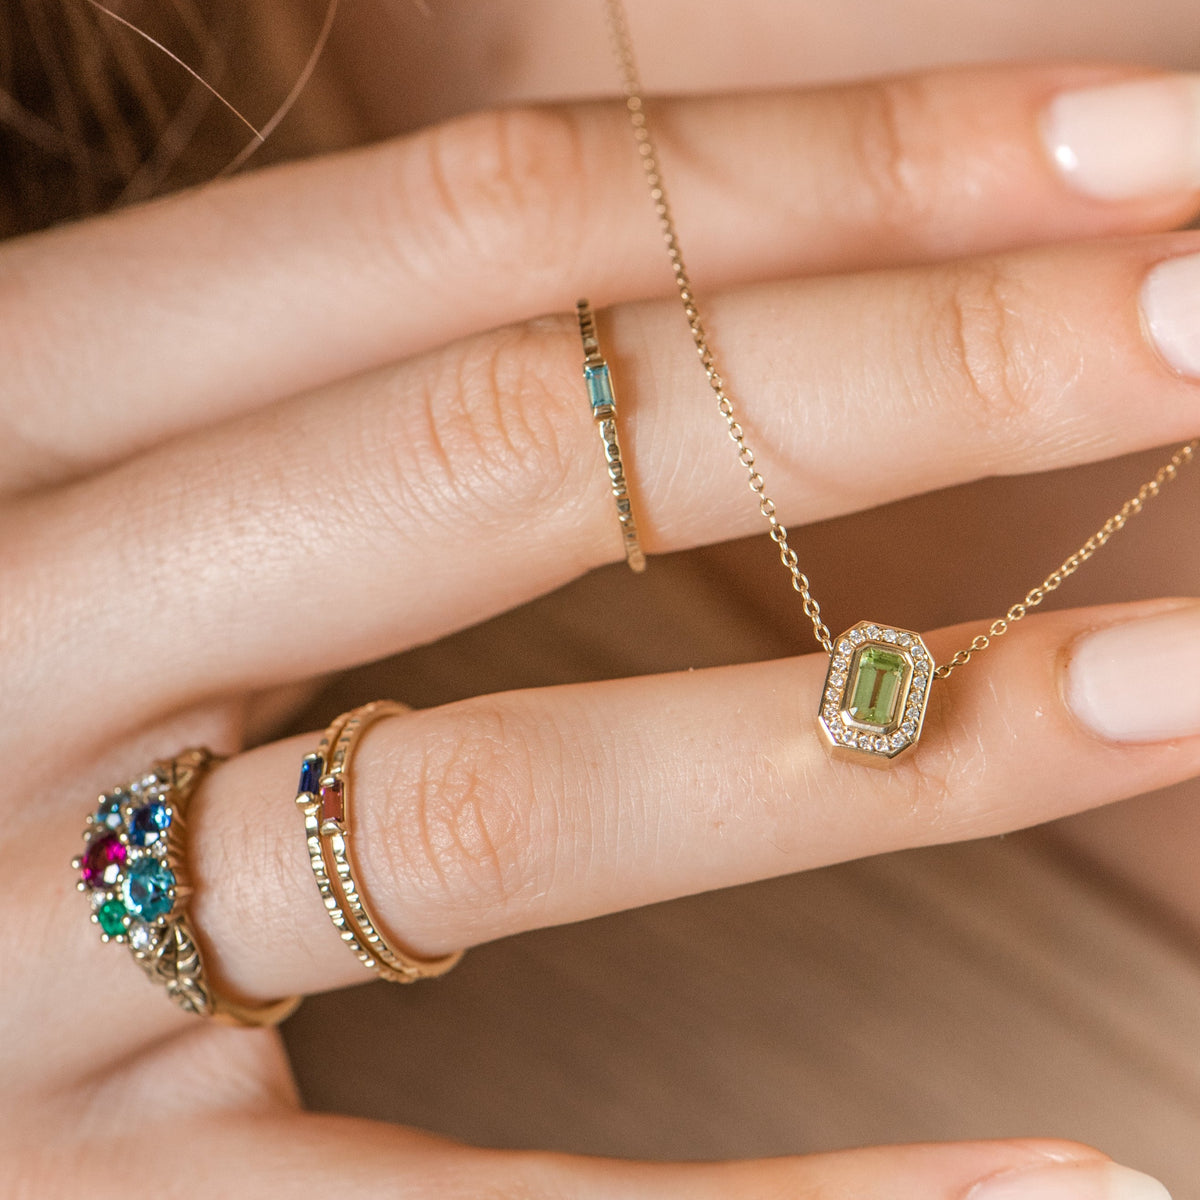 Petite Baguette Birthstone Stacking Ring | Yellow Gold